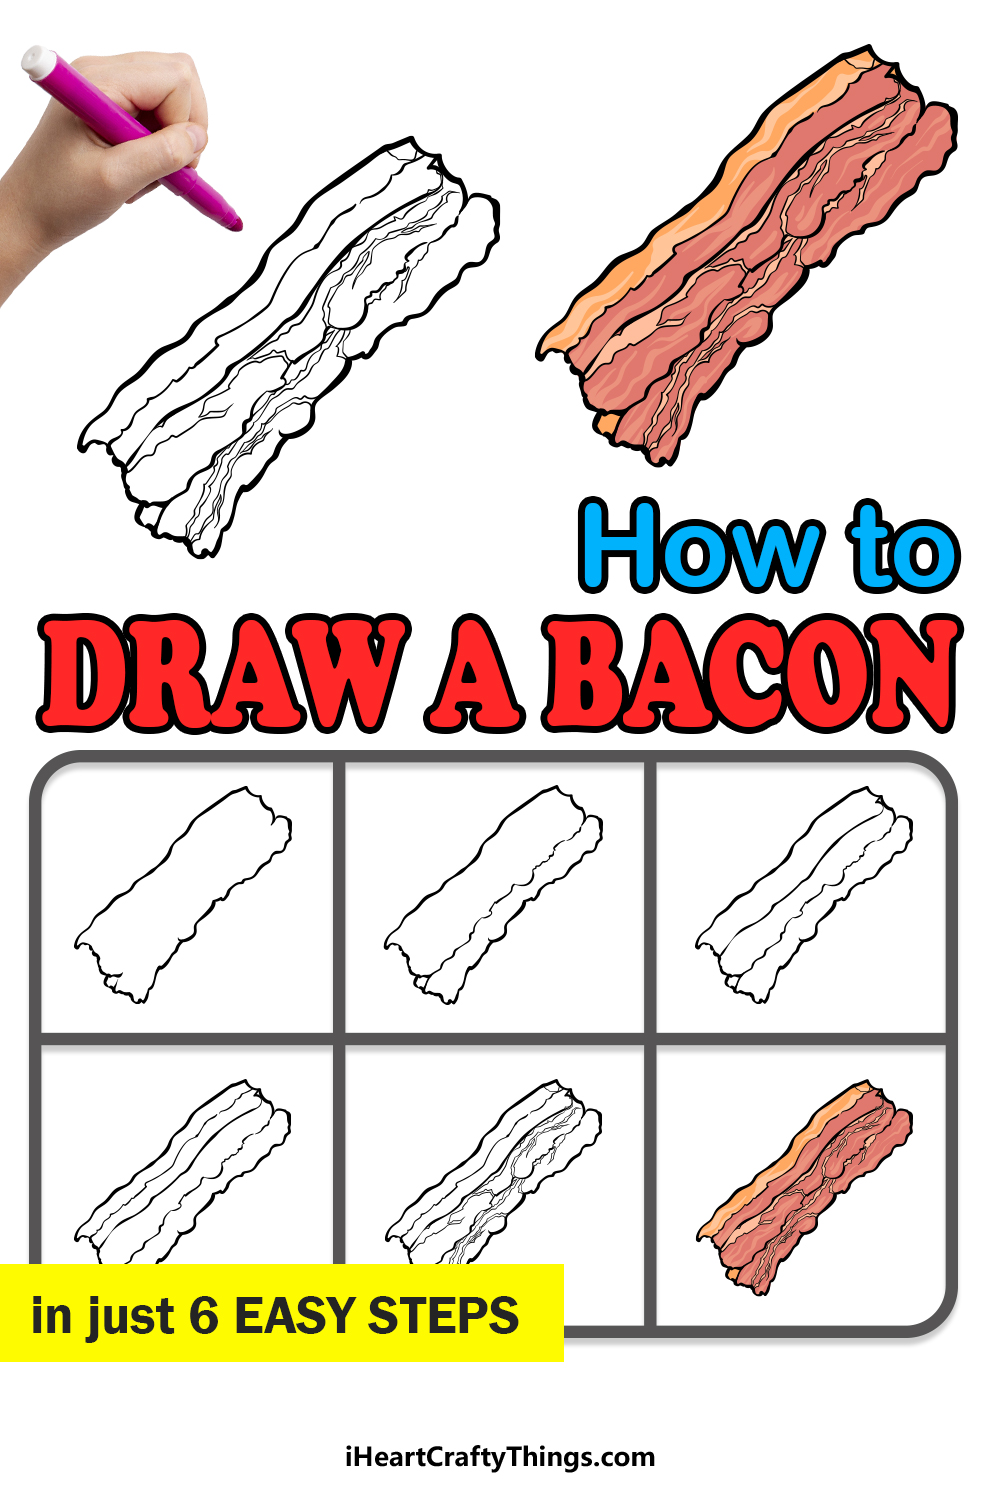 how to draw Bacon in 6 easy steps